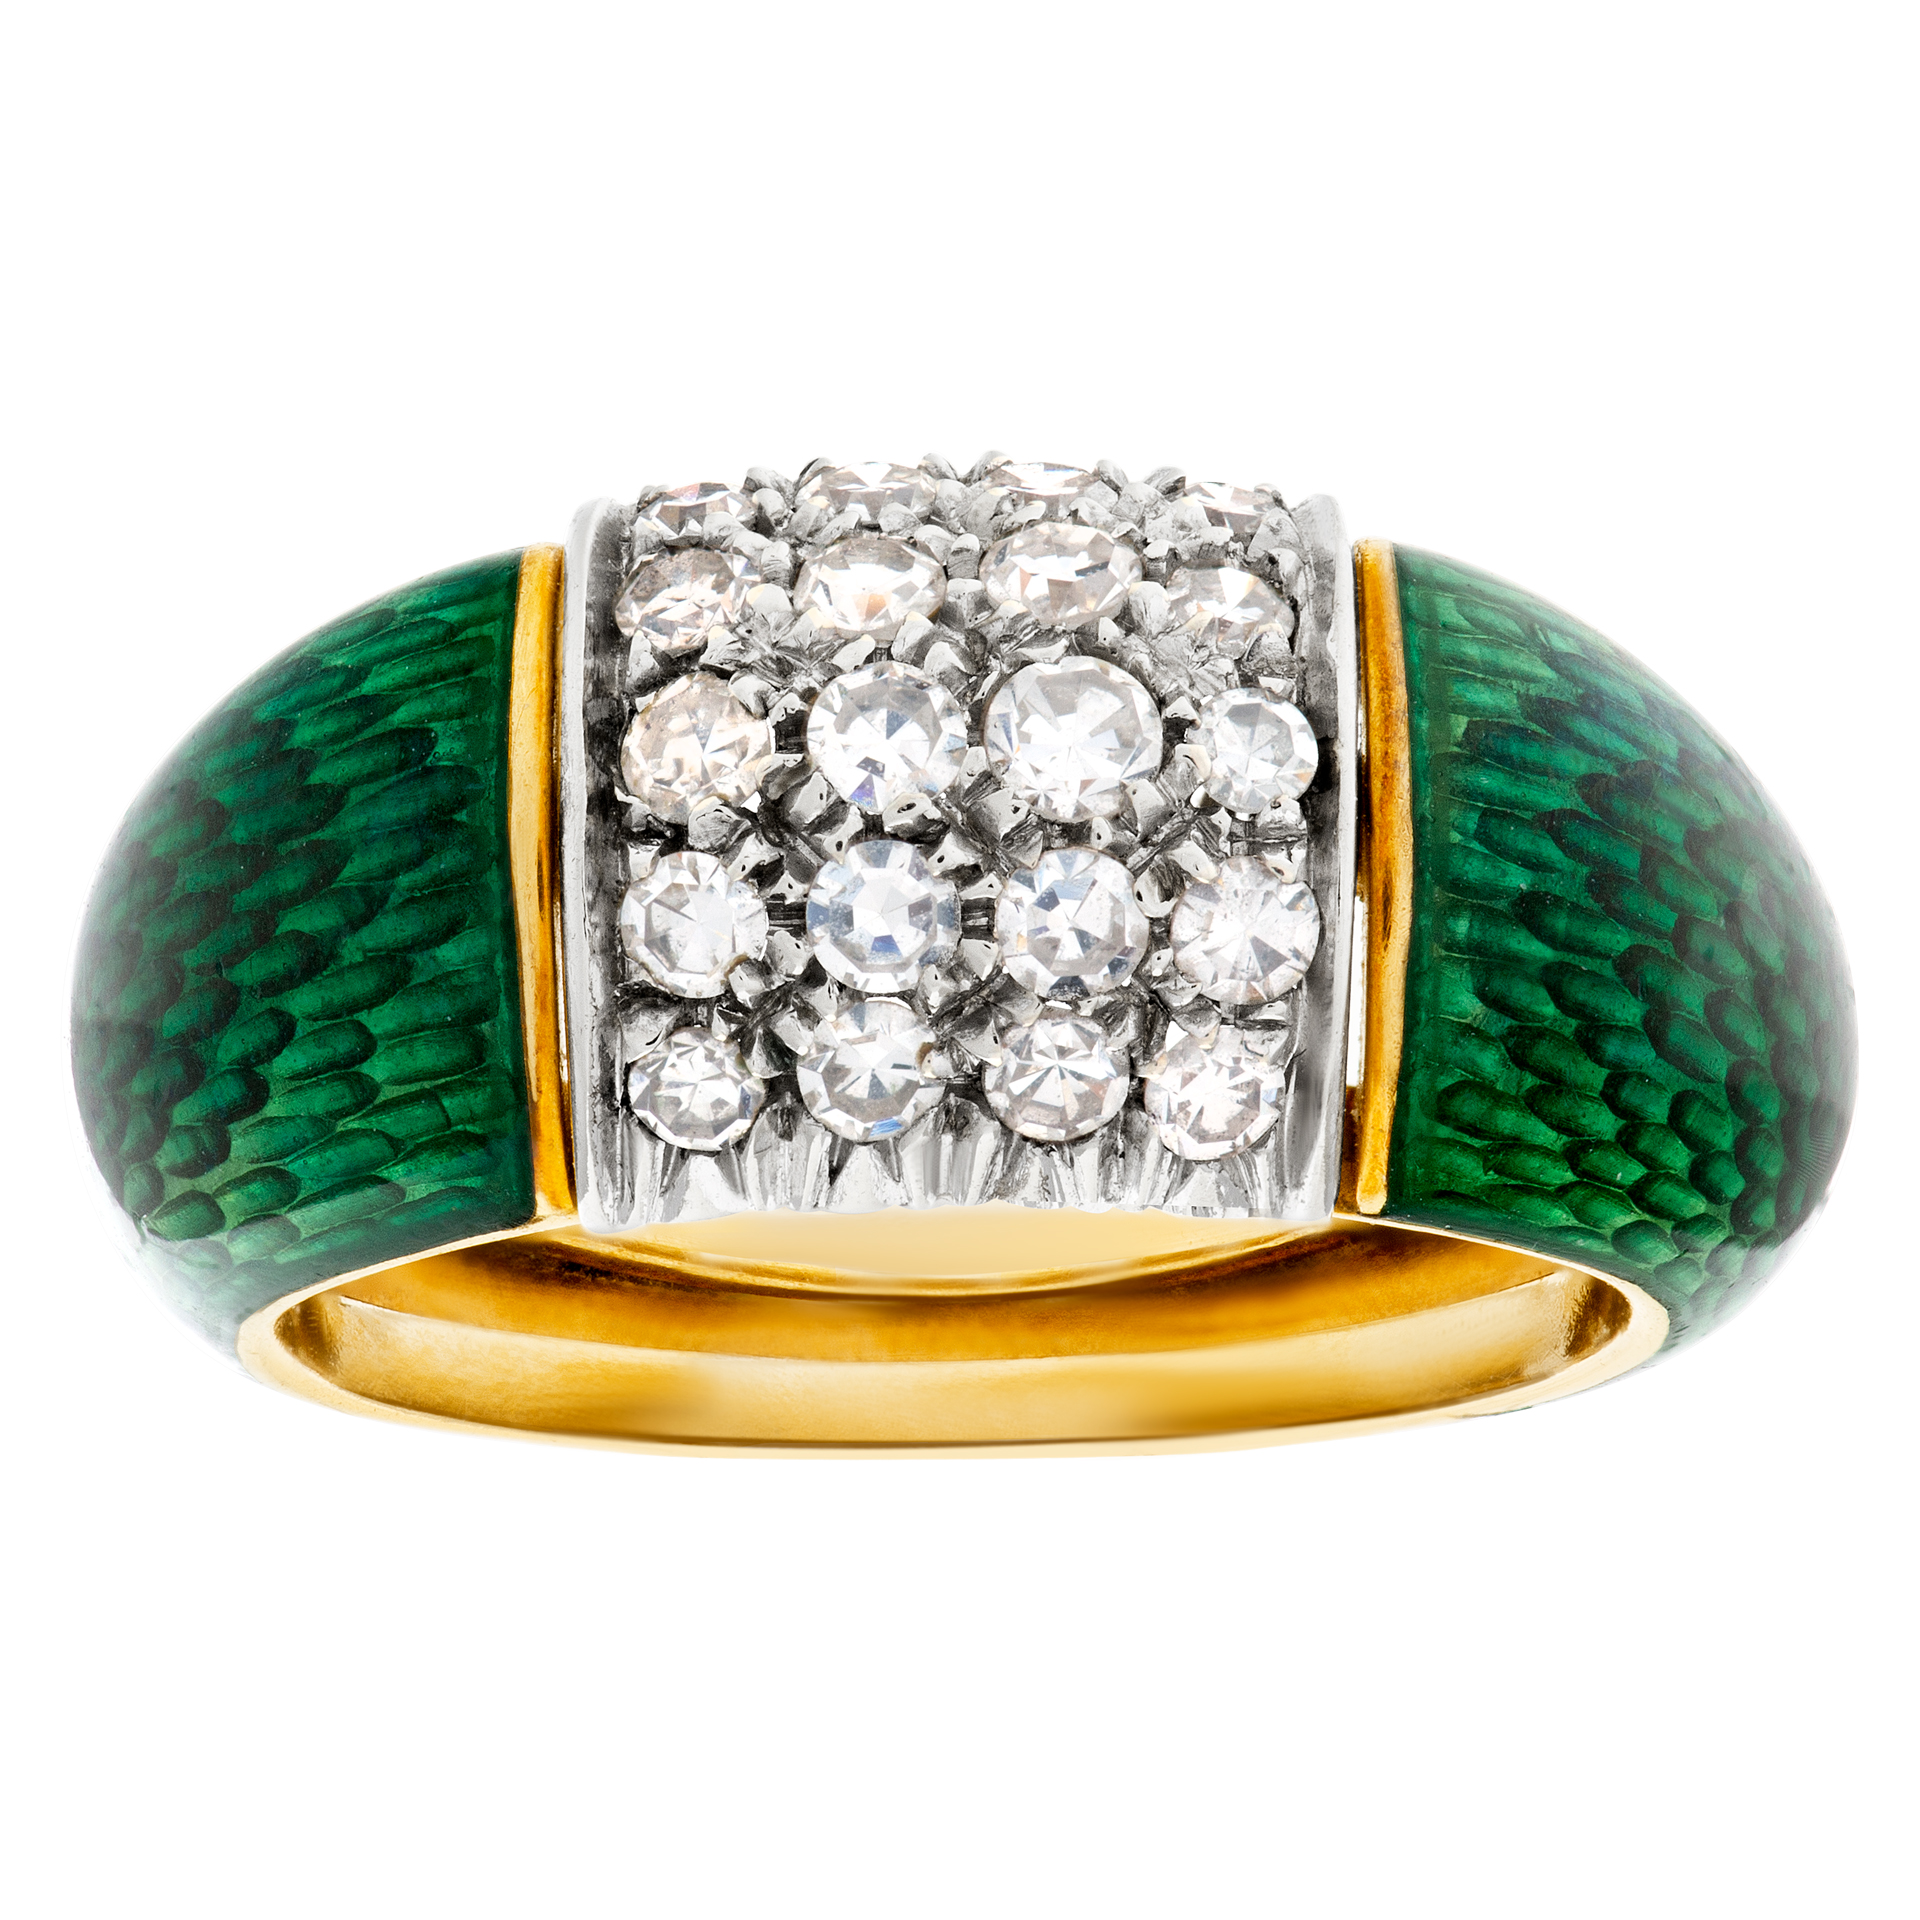 Enamel ring In 18k with pave diamonds. Size 4.5 image 1